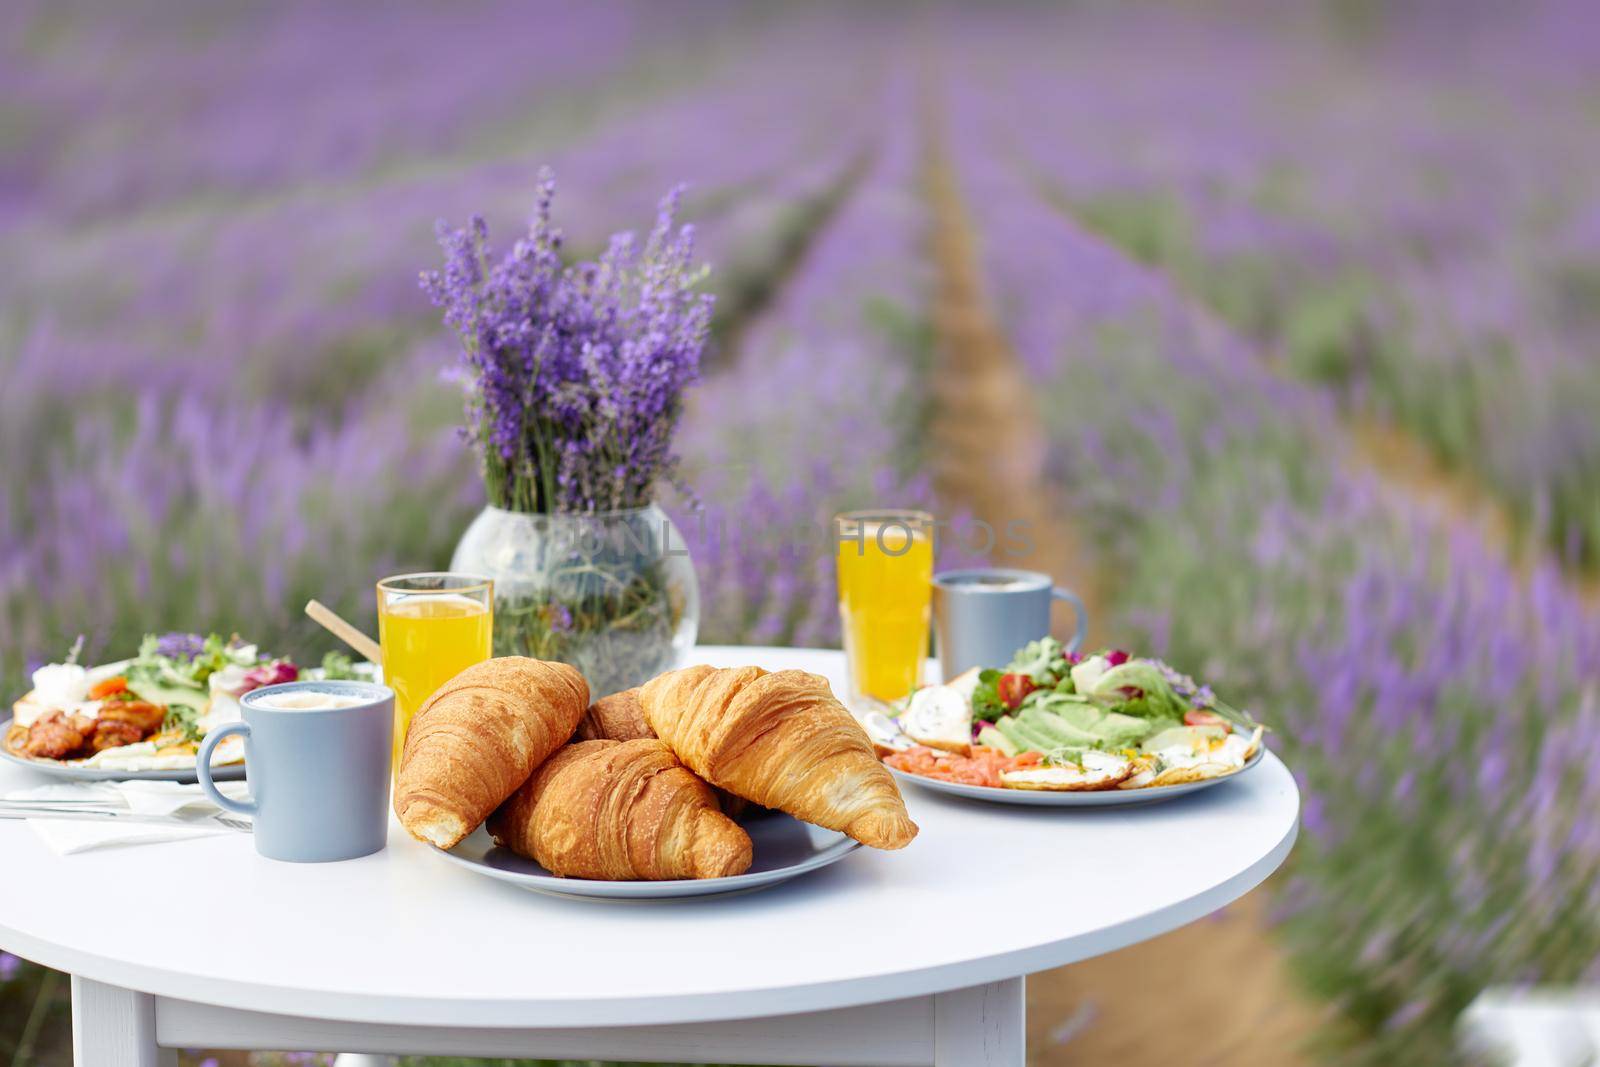 White wooden table served with croissants, glasses of orange juice, honey jar and fresh appetizers for date and vase with lavender bouquet. Side view of decoration, lavender patches on backgound.